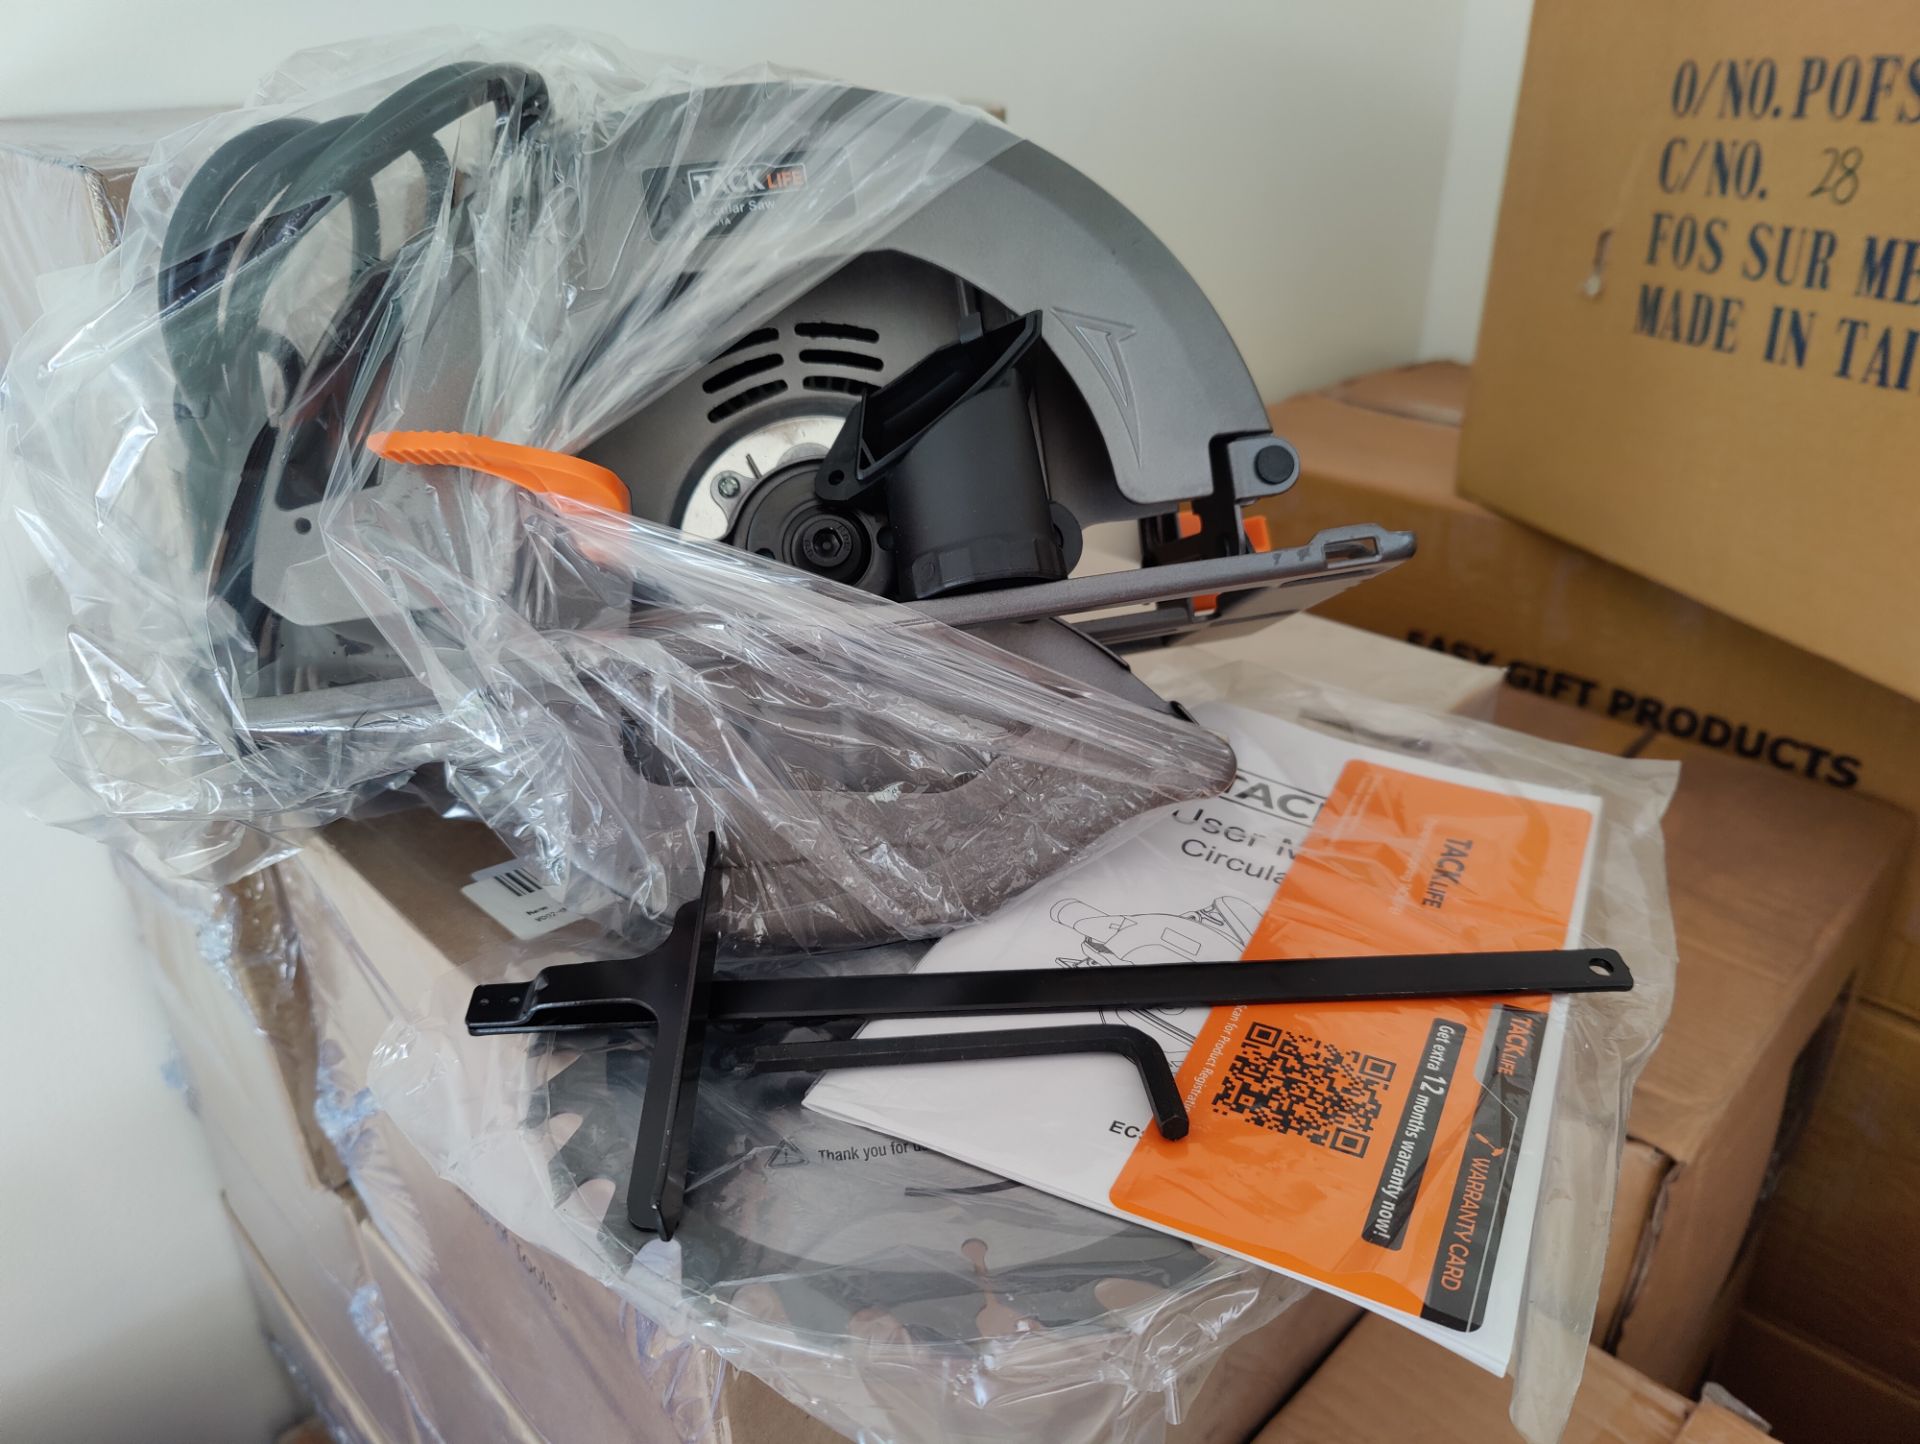 New Boxed Tacklife Electric Circular Saw,1500W, 5000 RPM With Bevel Cuts 2-3/5' - Image 4 of 4